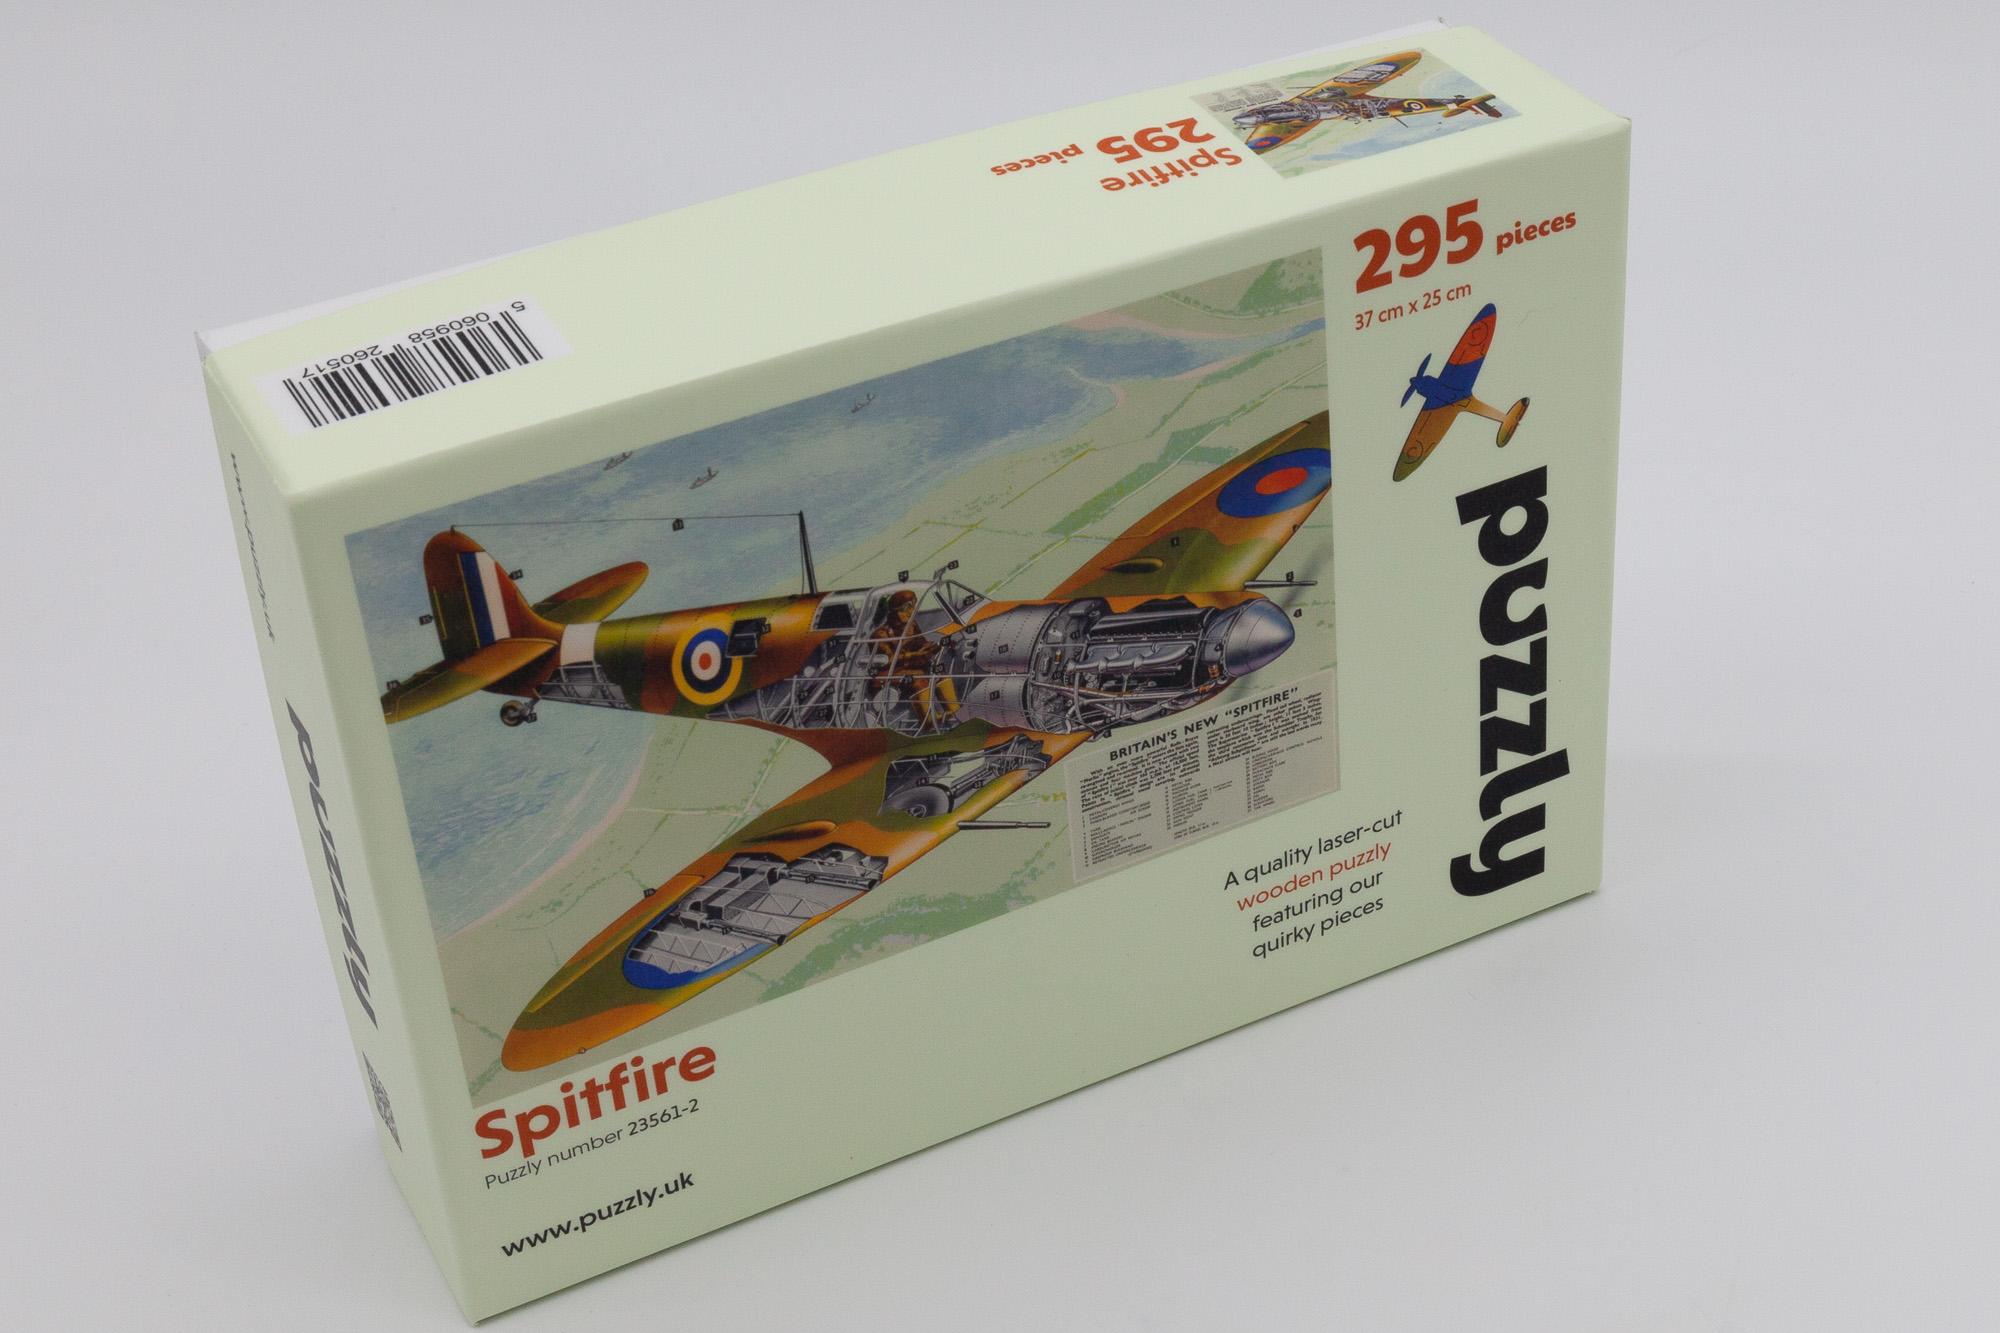 Puzzly Spitfire Wooden Puzzle